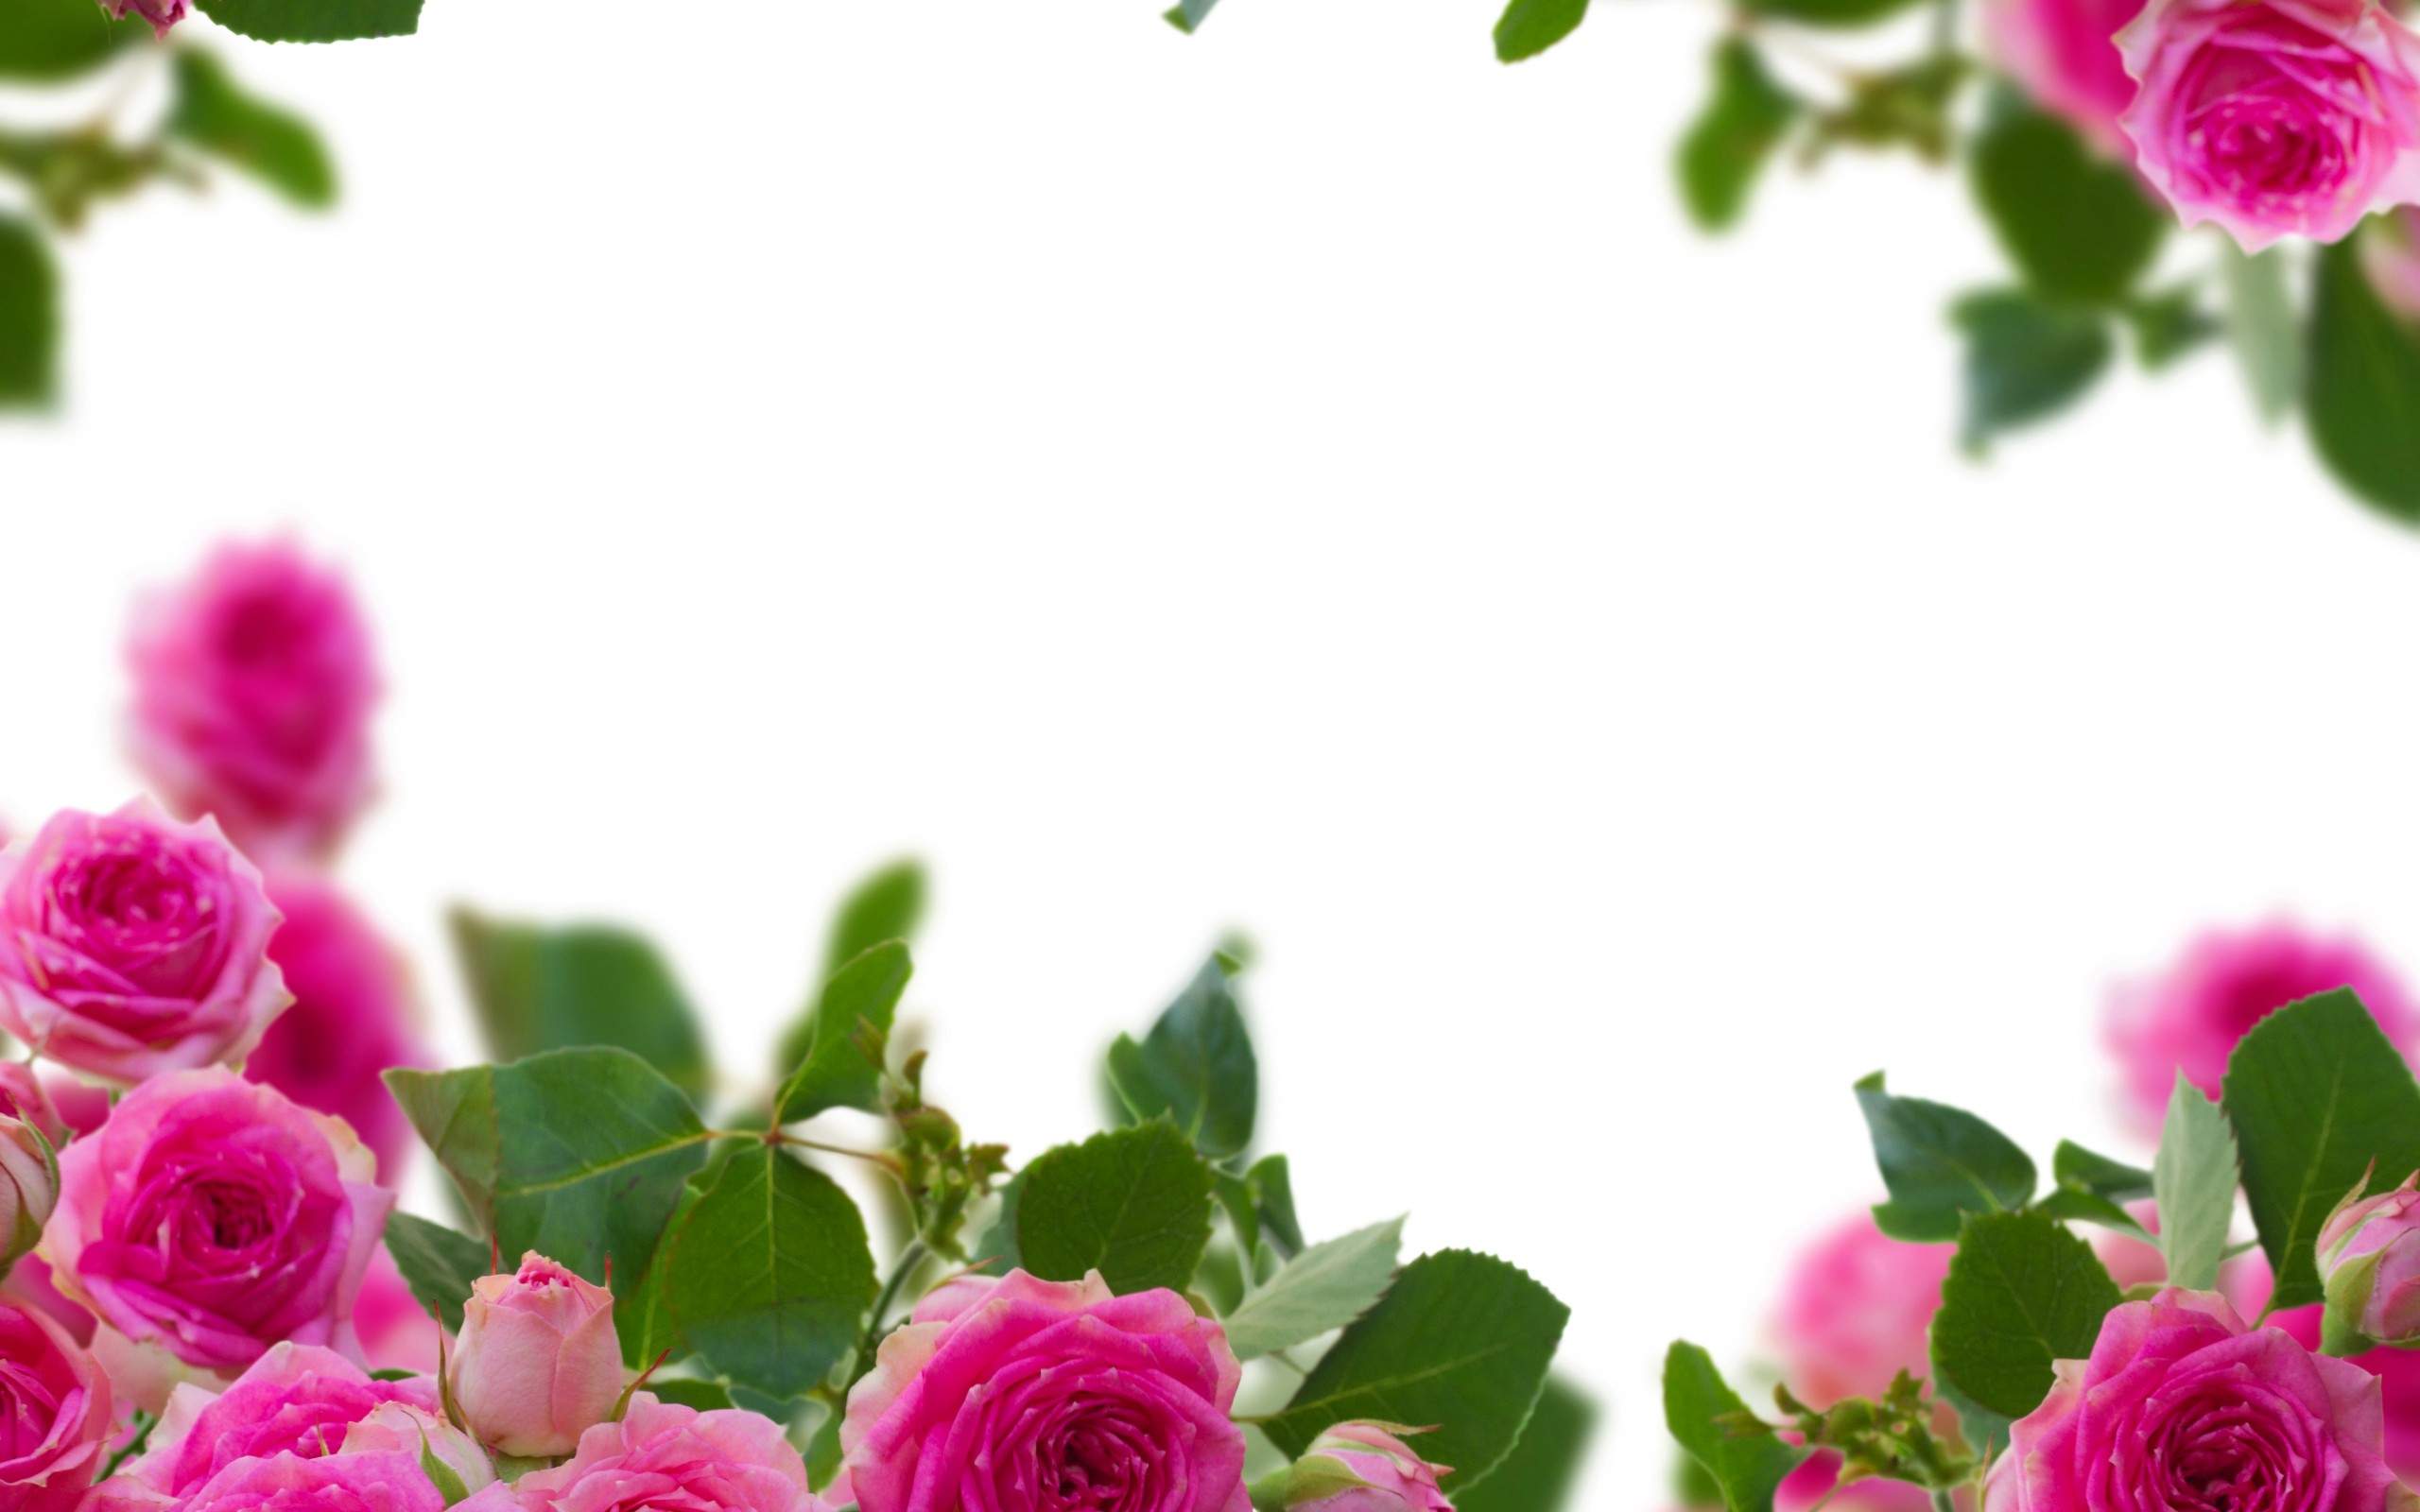 Pink Roses Background Wallpaper